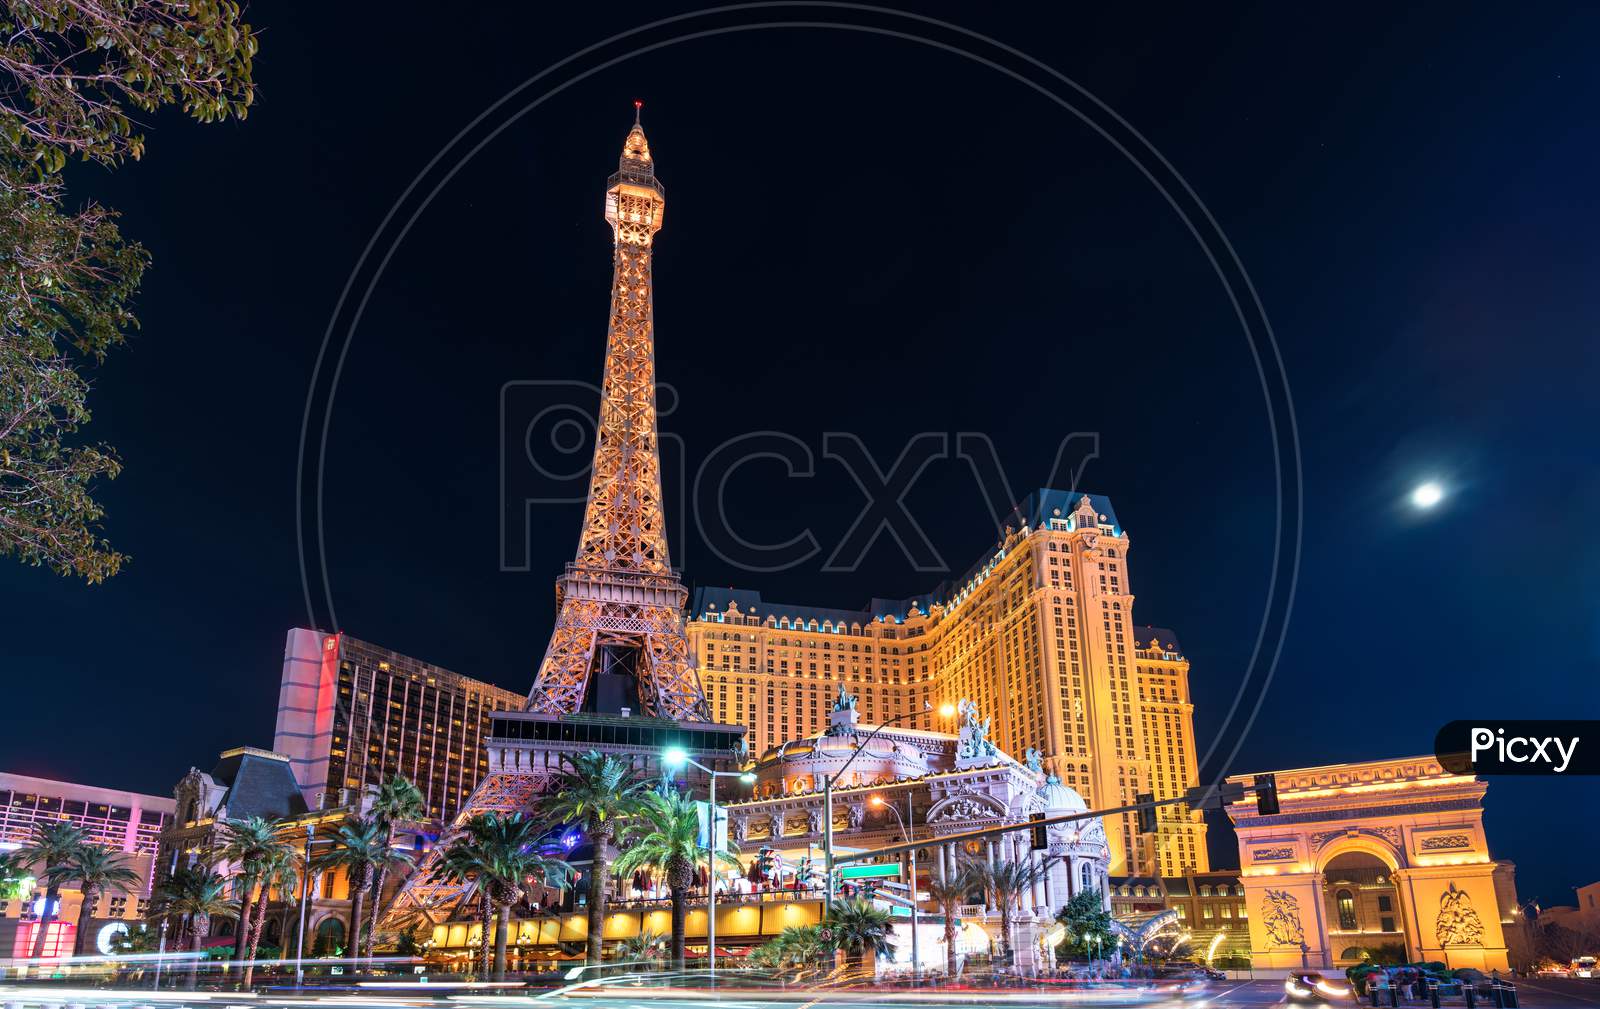 Replica Of The Eiffel Tower In Las Vegas, United States